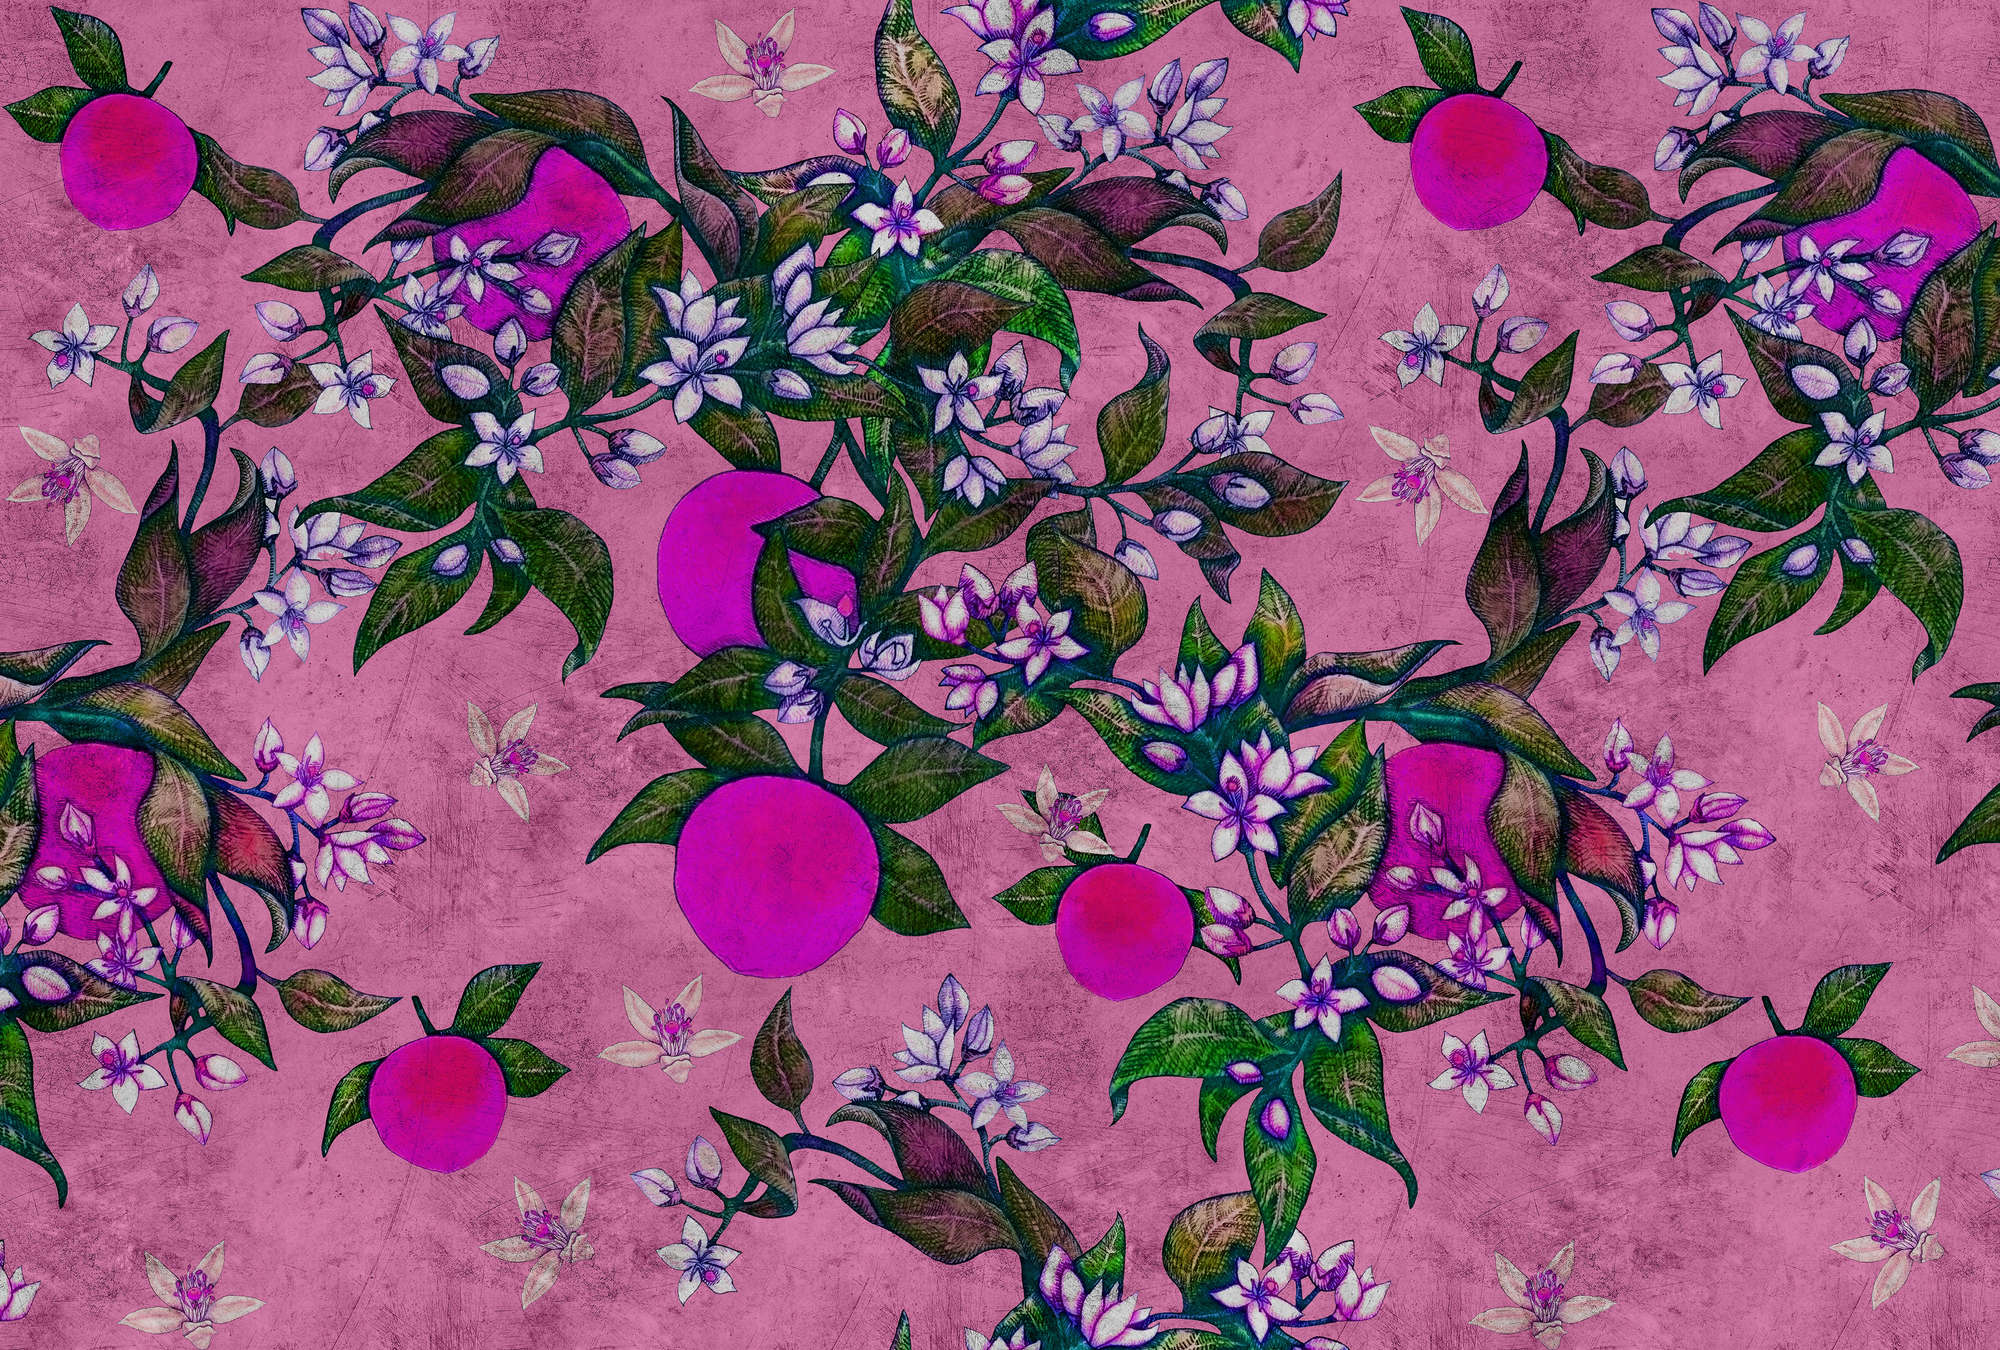             Grapefruit Tree 2 - Photo wallpaper with grapefruit & flower design in scratchy texture - Pink, Purple | Textured Non-woven
        